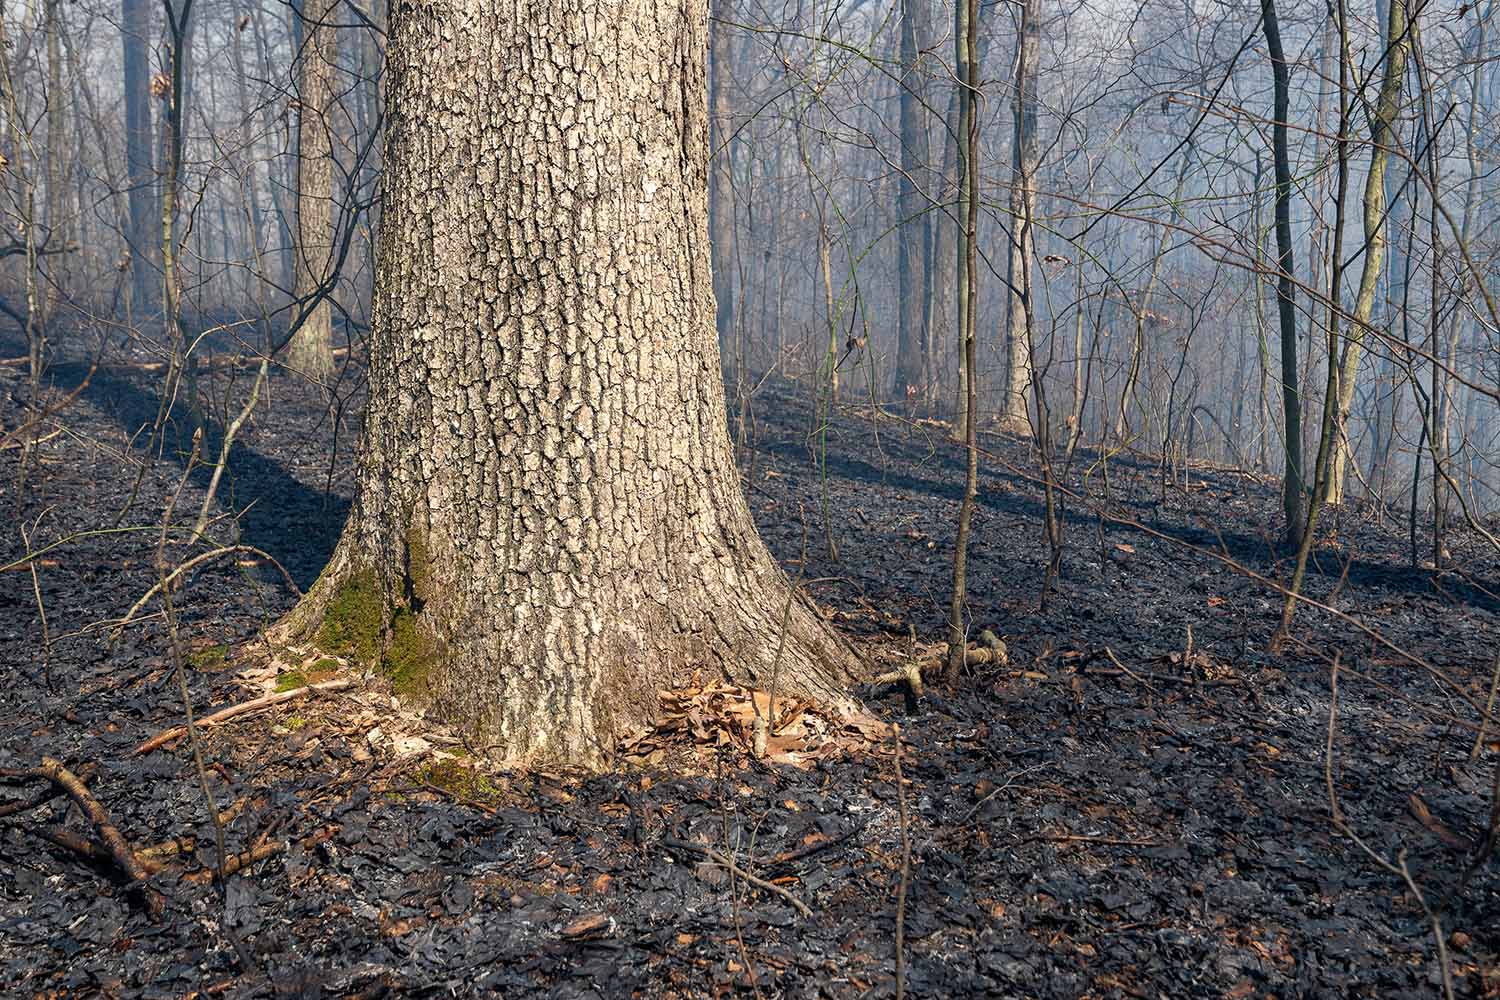 A mature oak rises unharmed from a burnt forest floor.